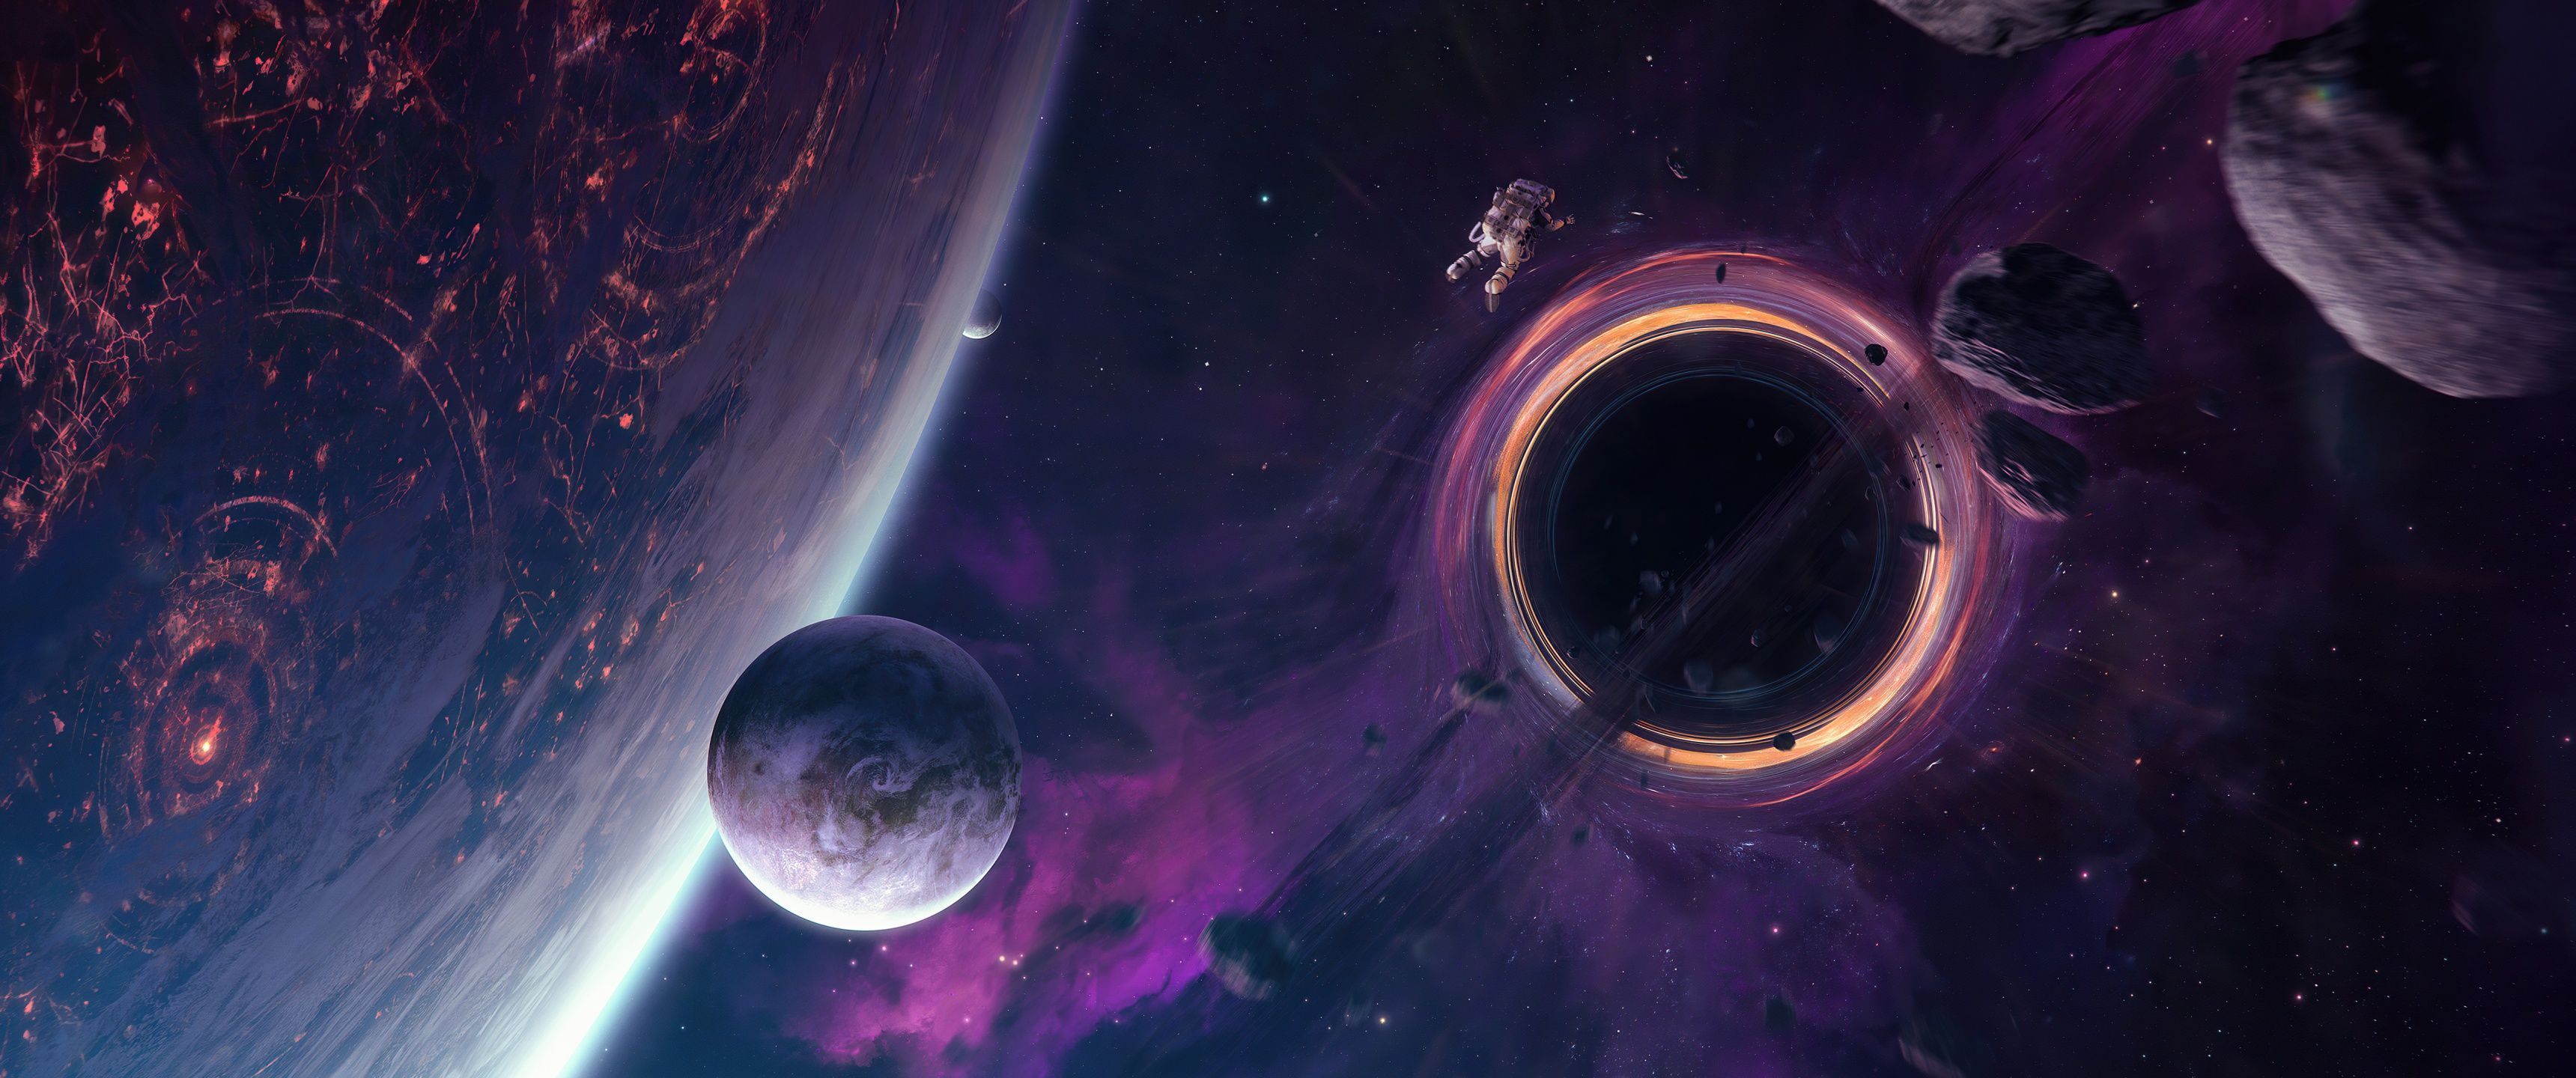 A space scene with black hole and planets - 3440x1440